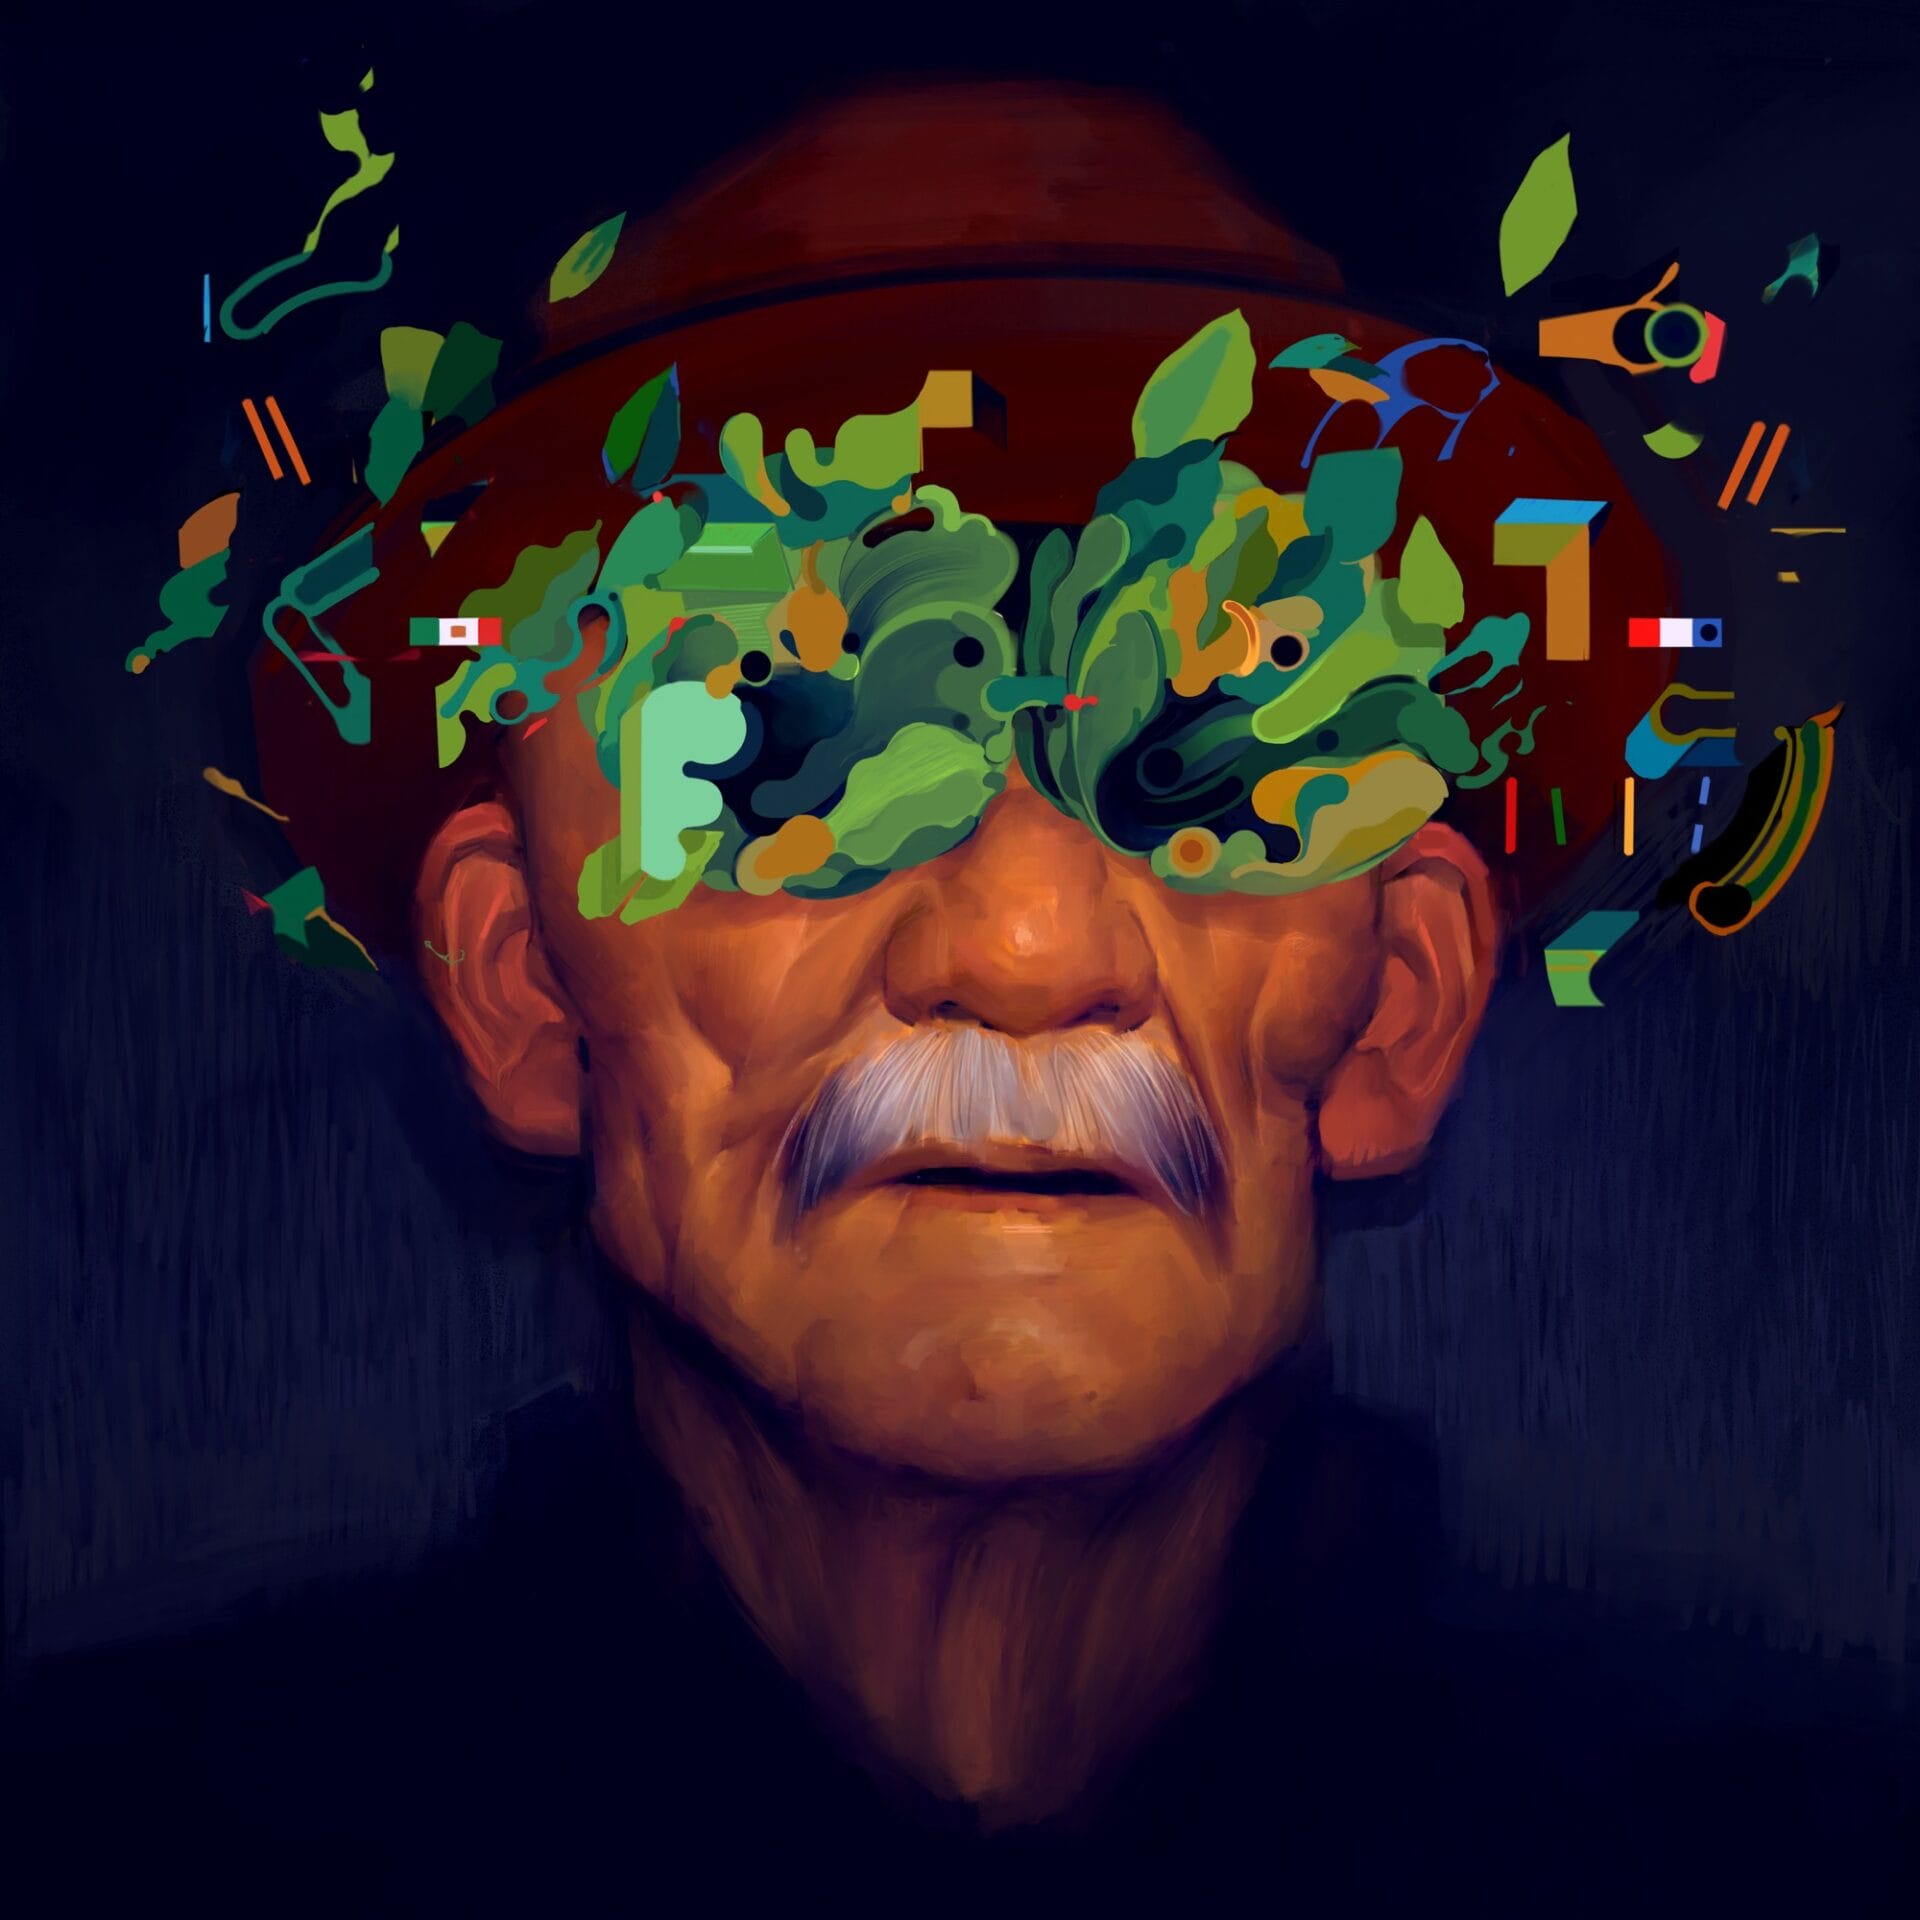 an older man wearing a red hat sprouts cabbage like greens from his eyes